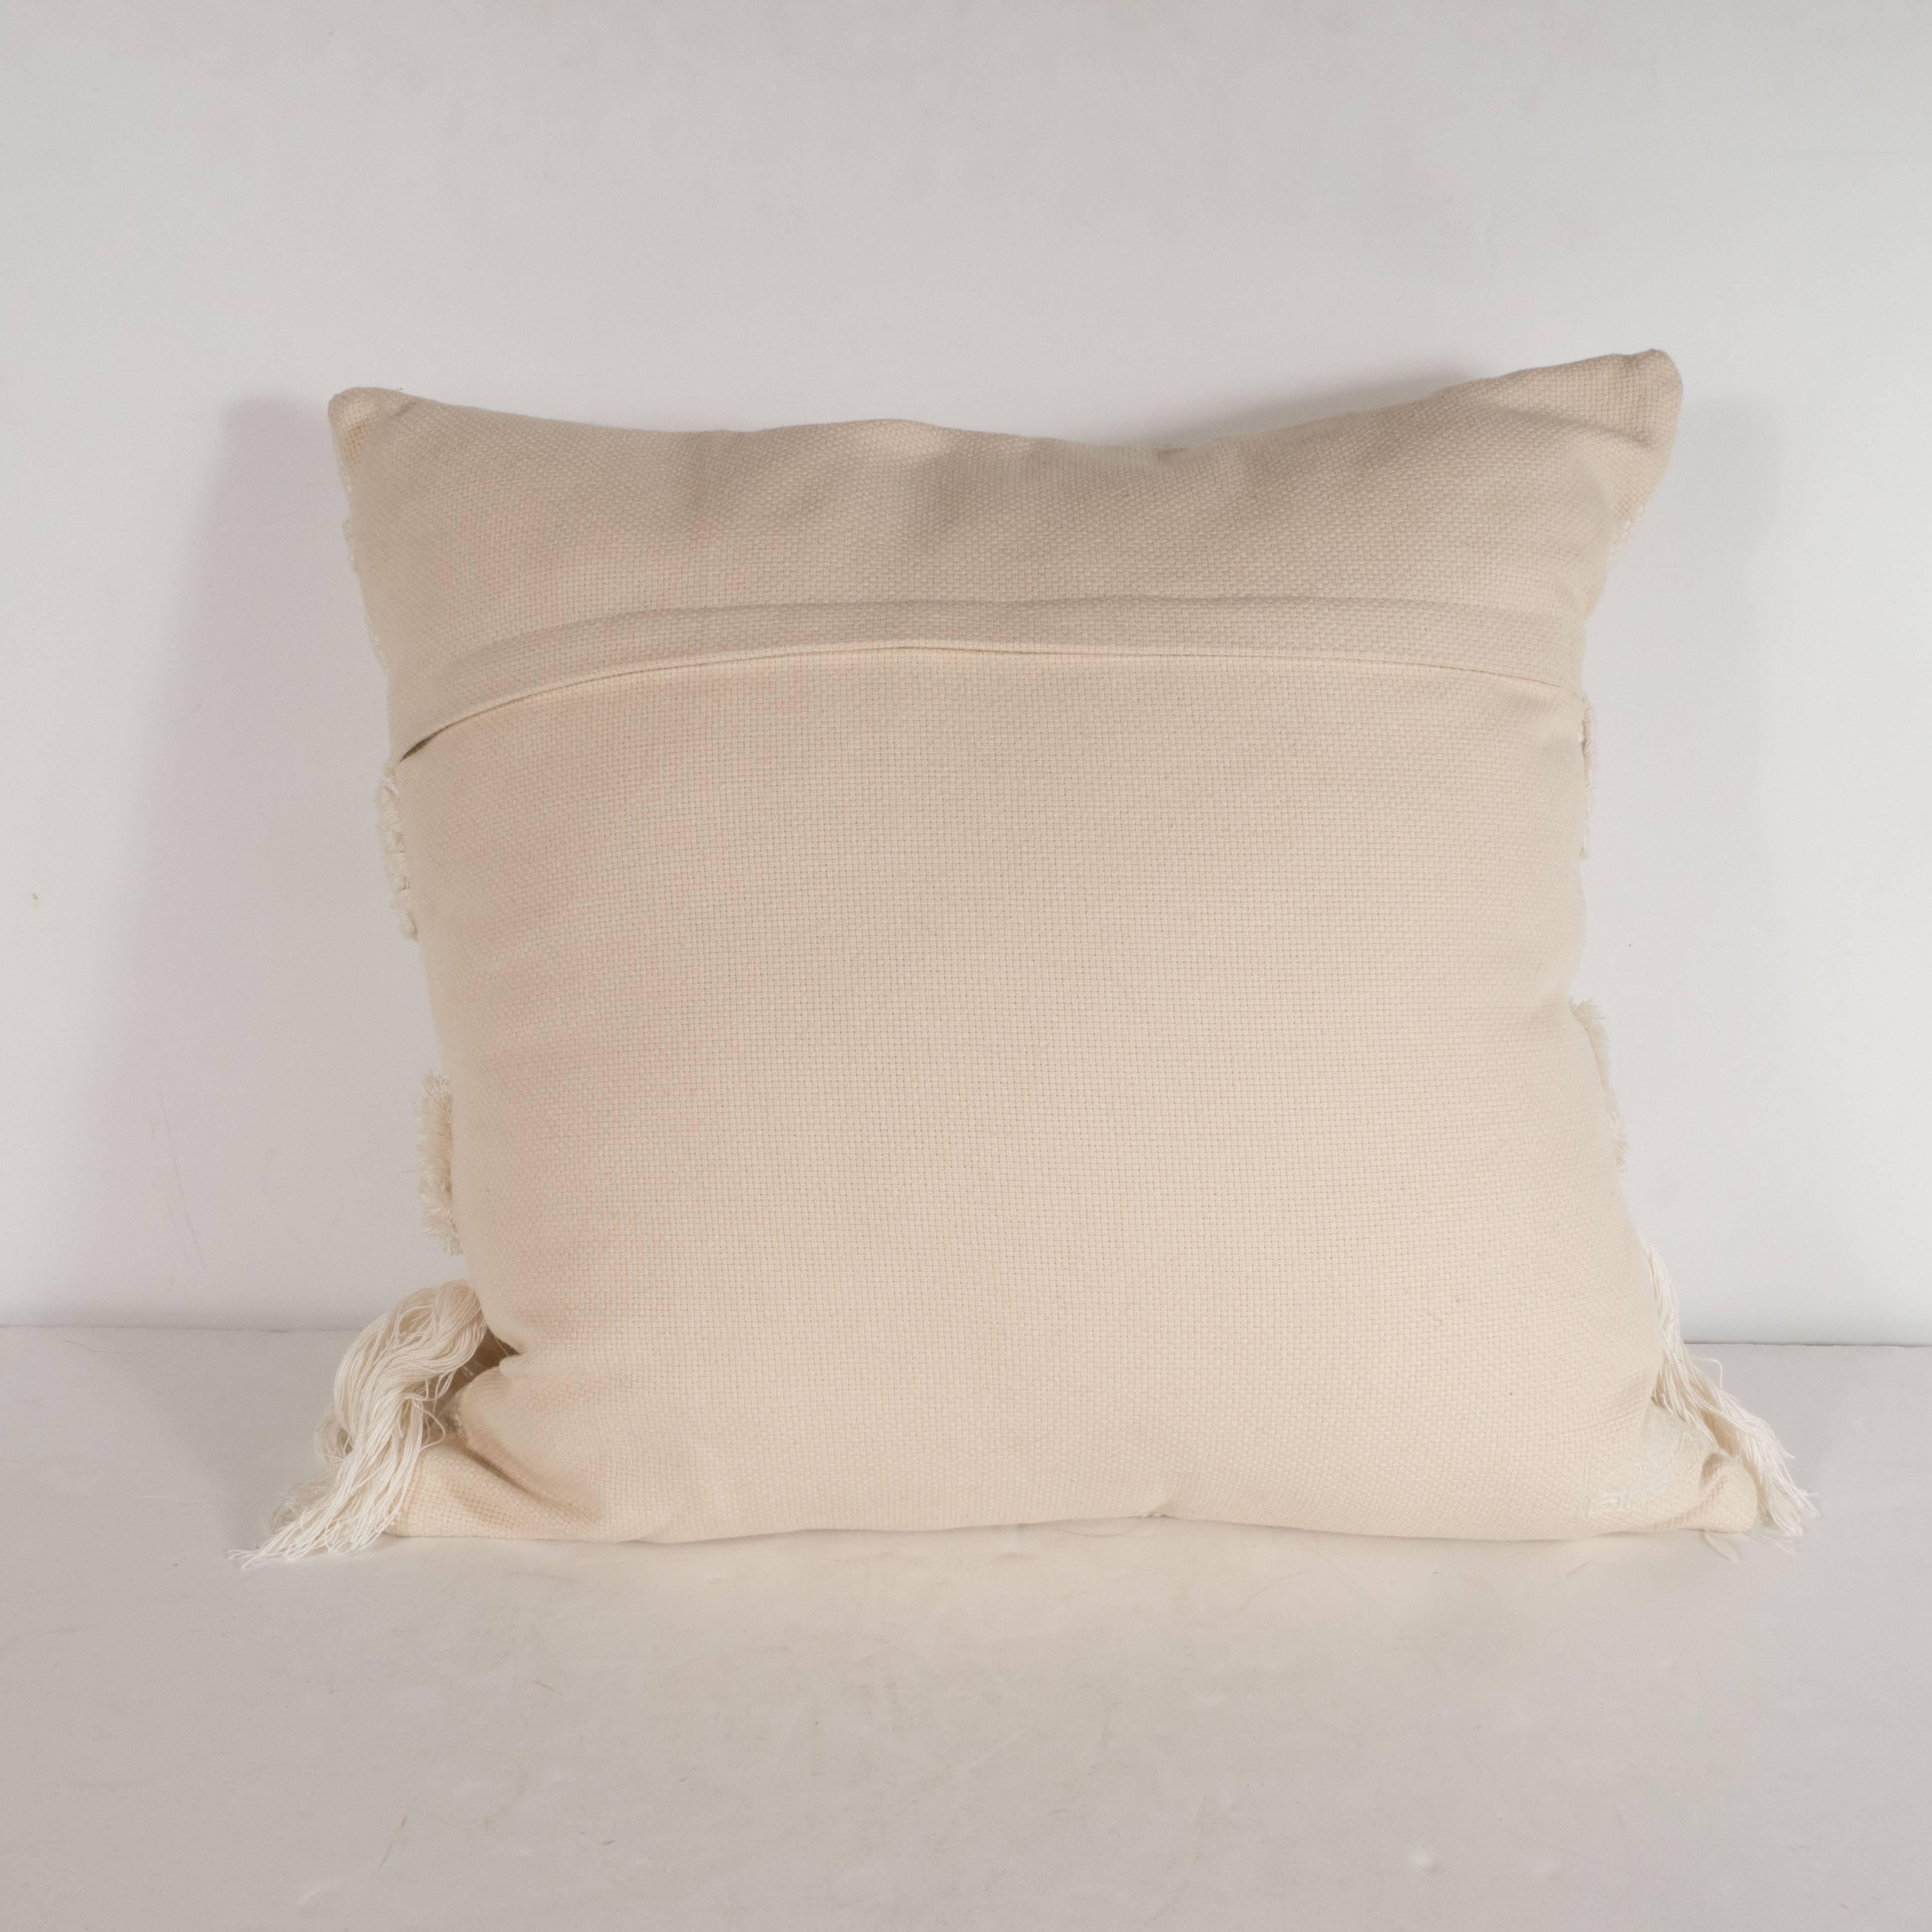 Contemporary Pair of Modernist Textured Woven Pillows in a Bone Hue